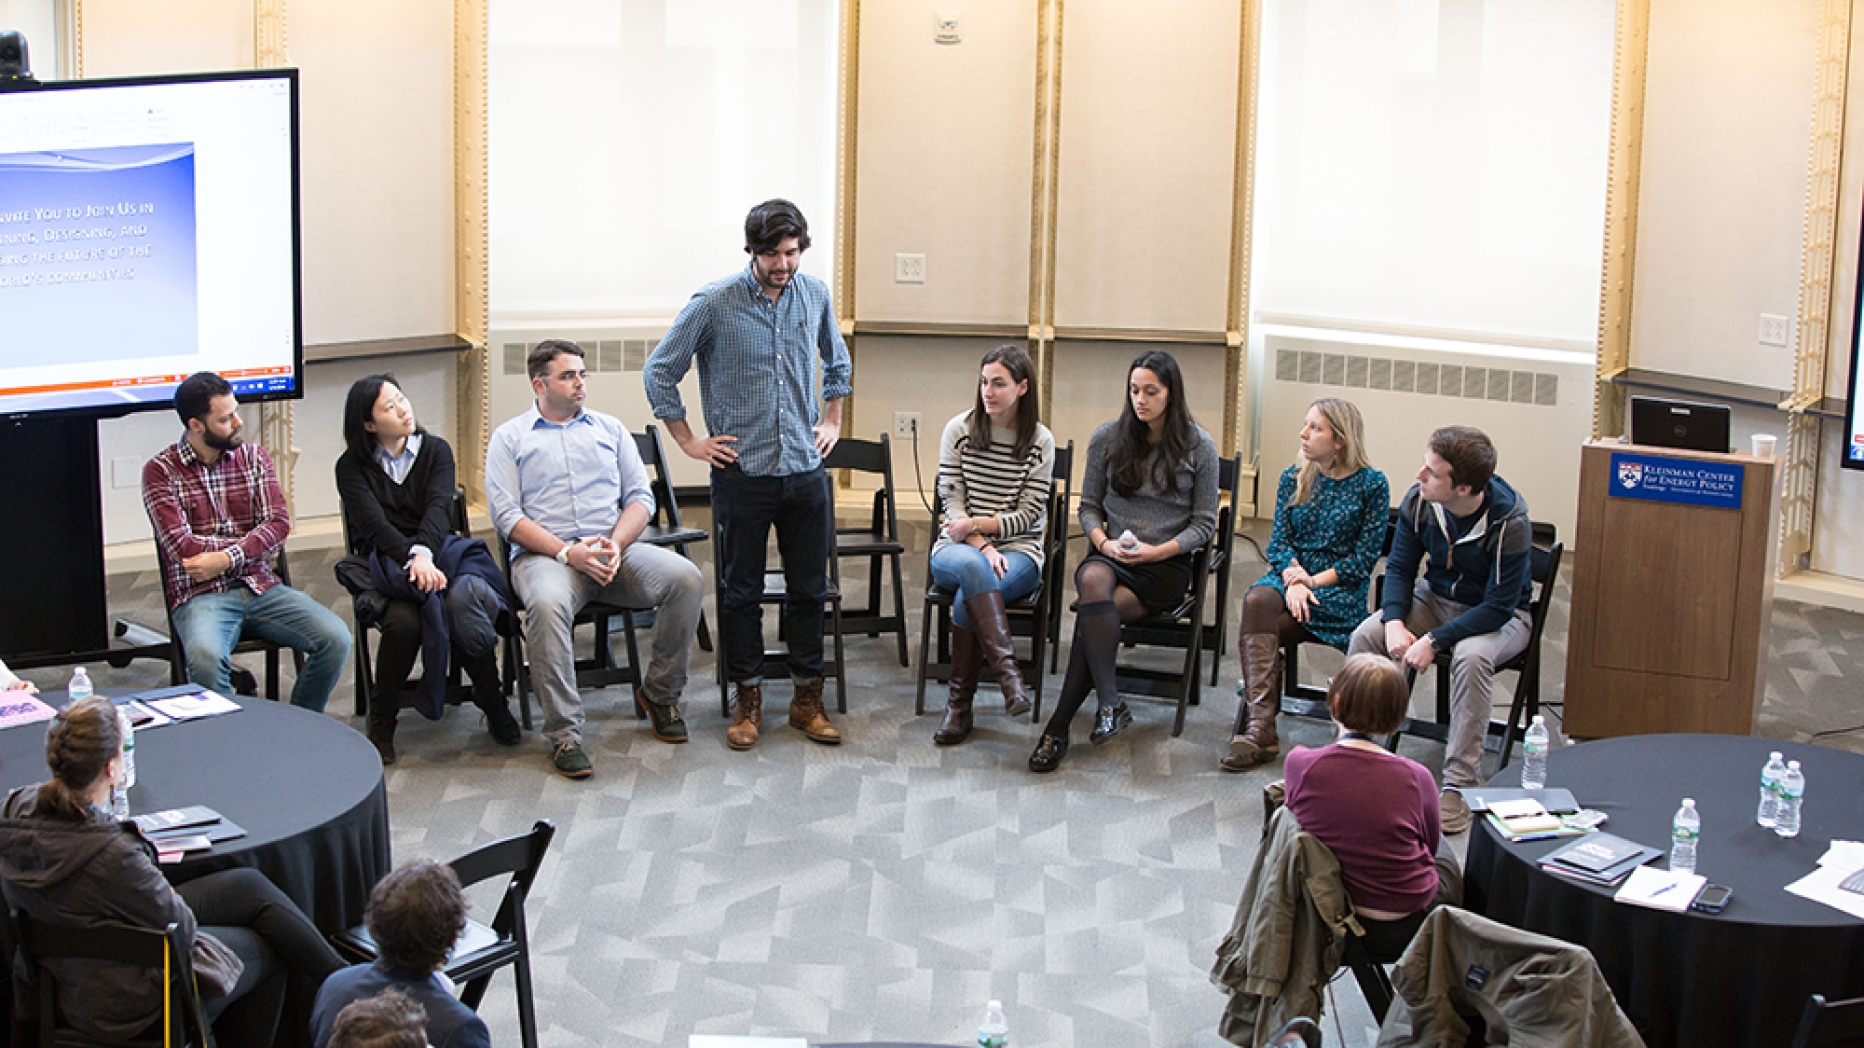 Students in a panel discussion, one standing